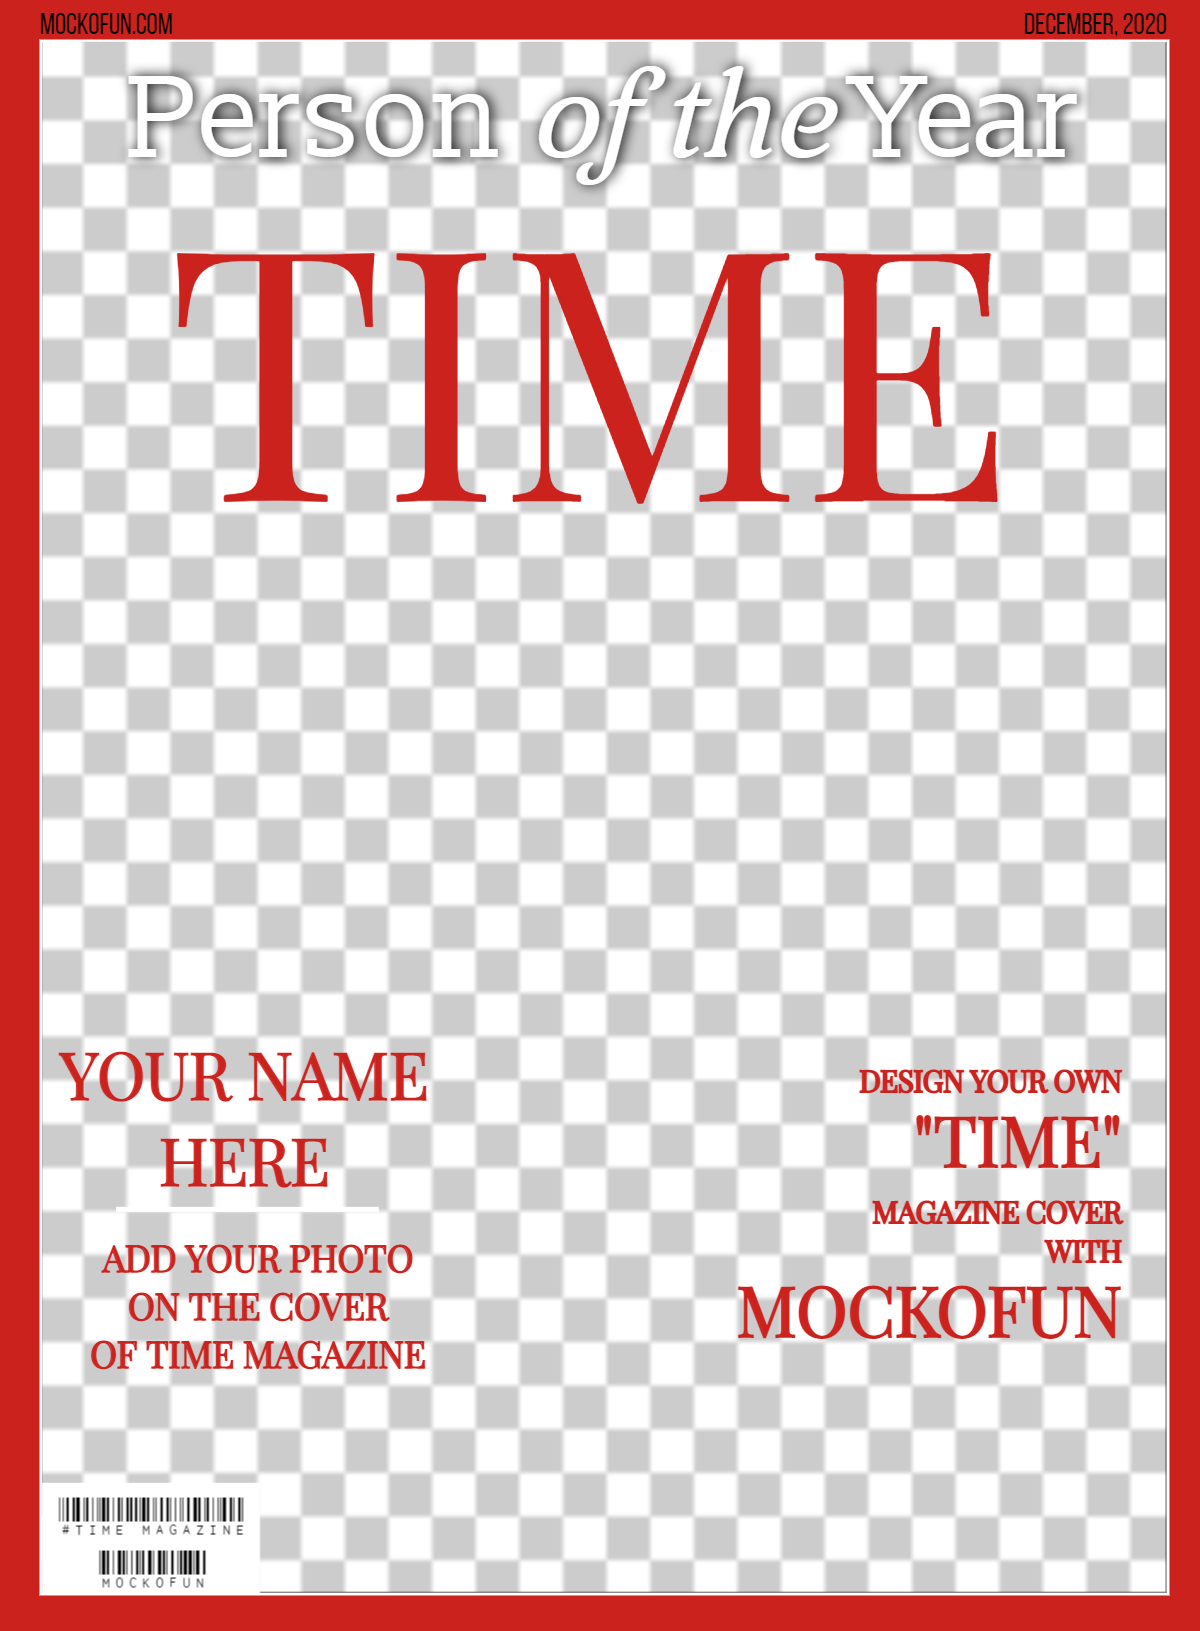 Free Magazine Cover Template